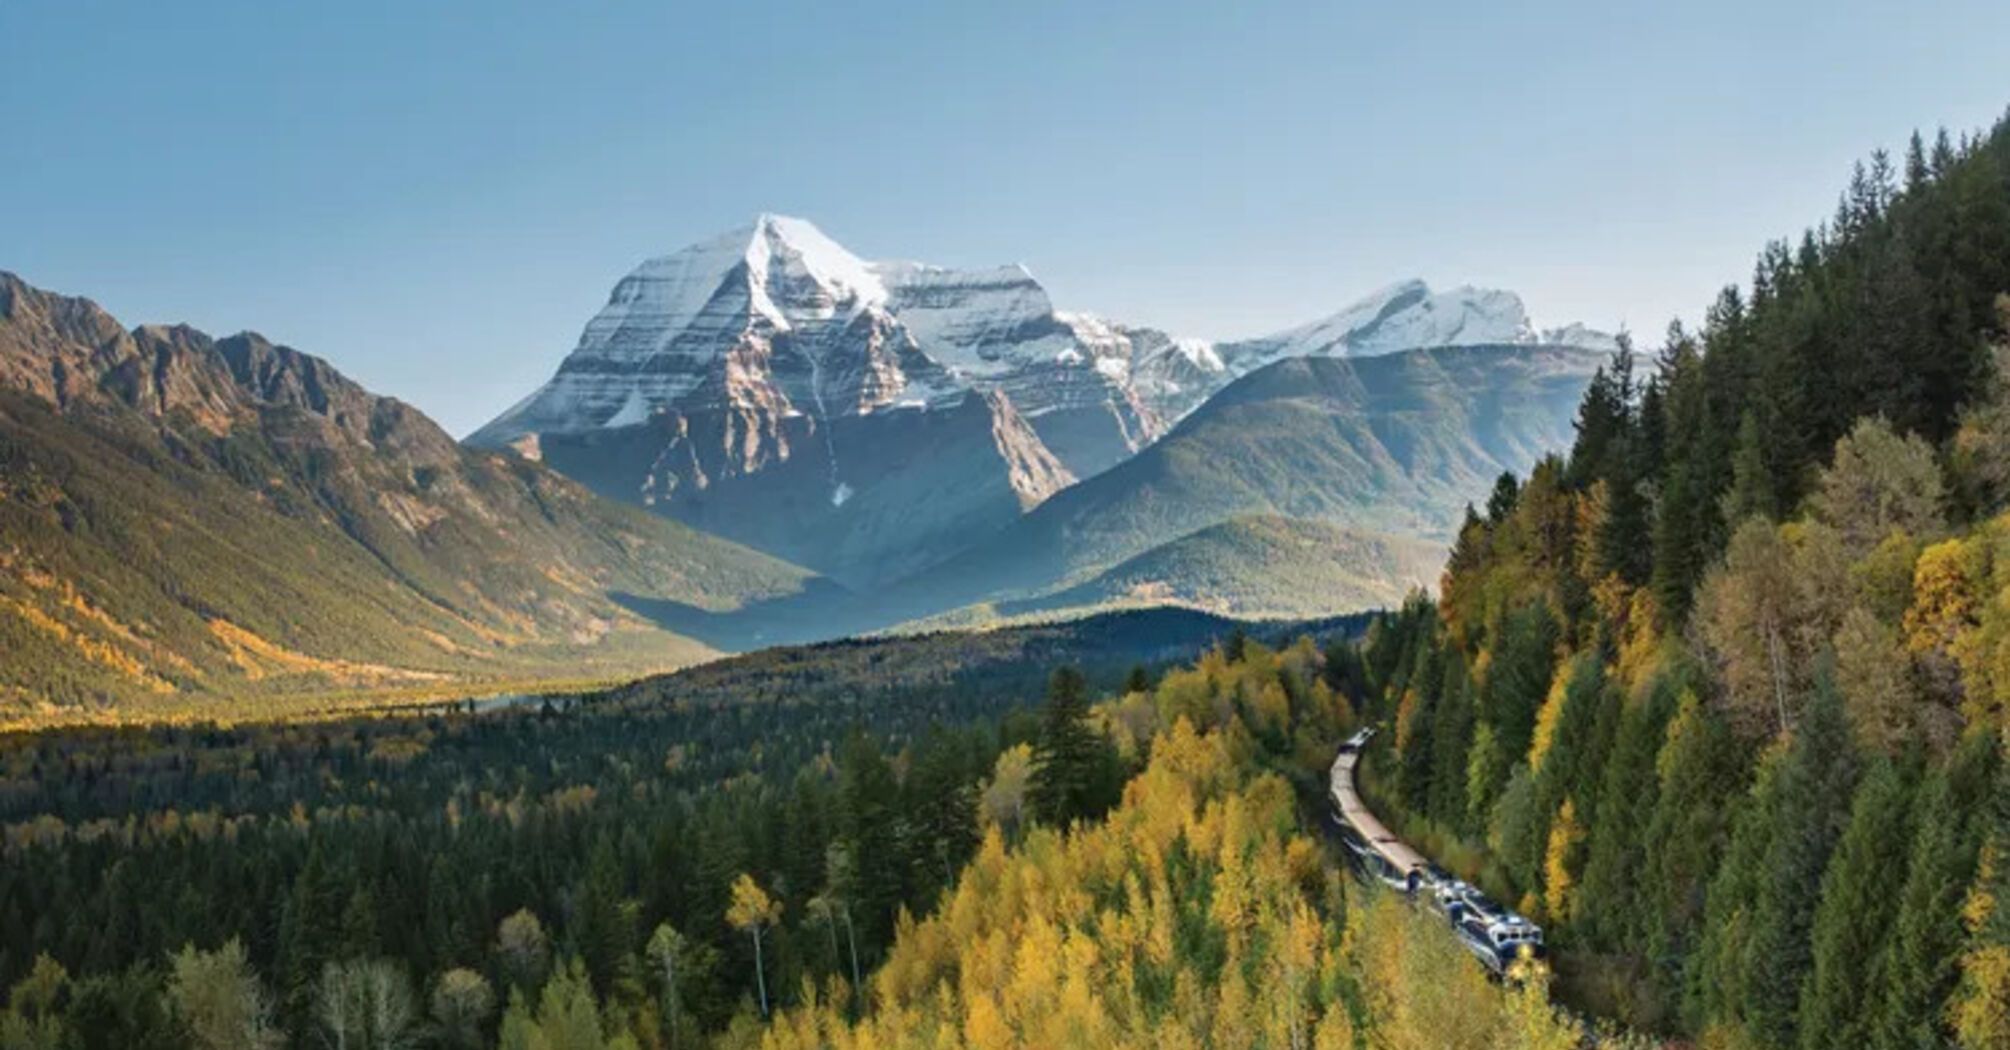 Luxurious carriages, delicious food, and breathtaking views: this train has been recognized as the best in the world